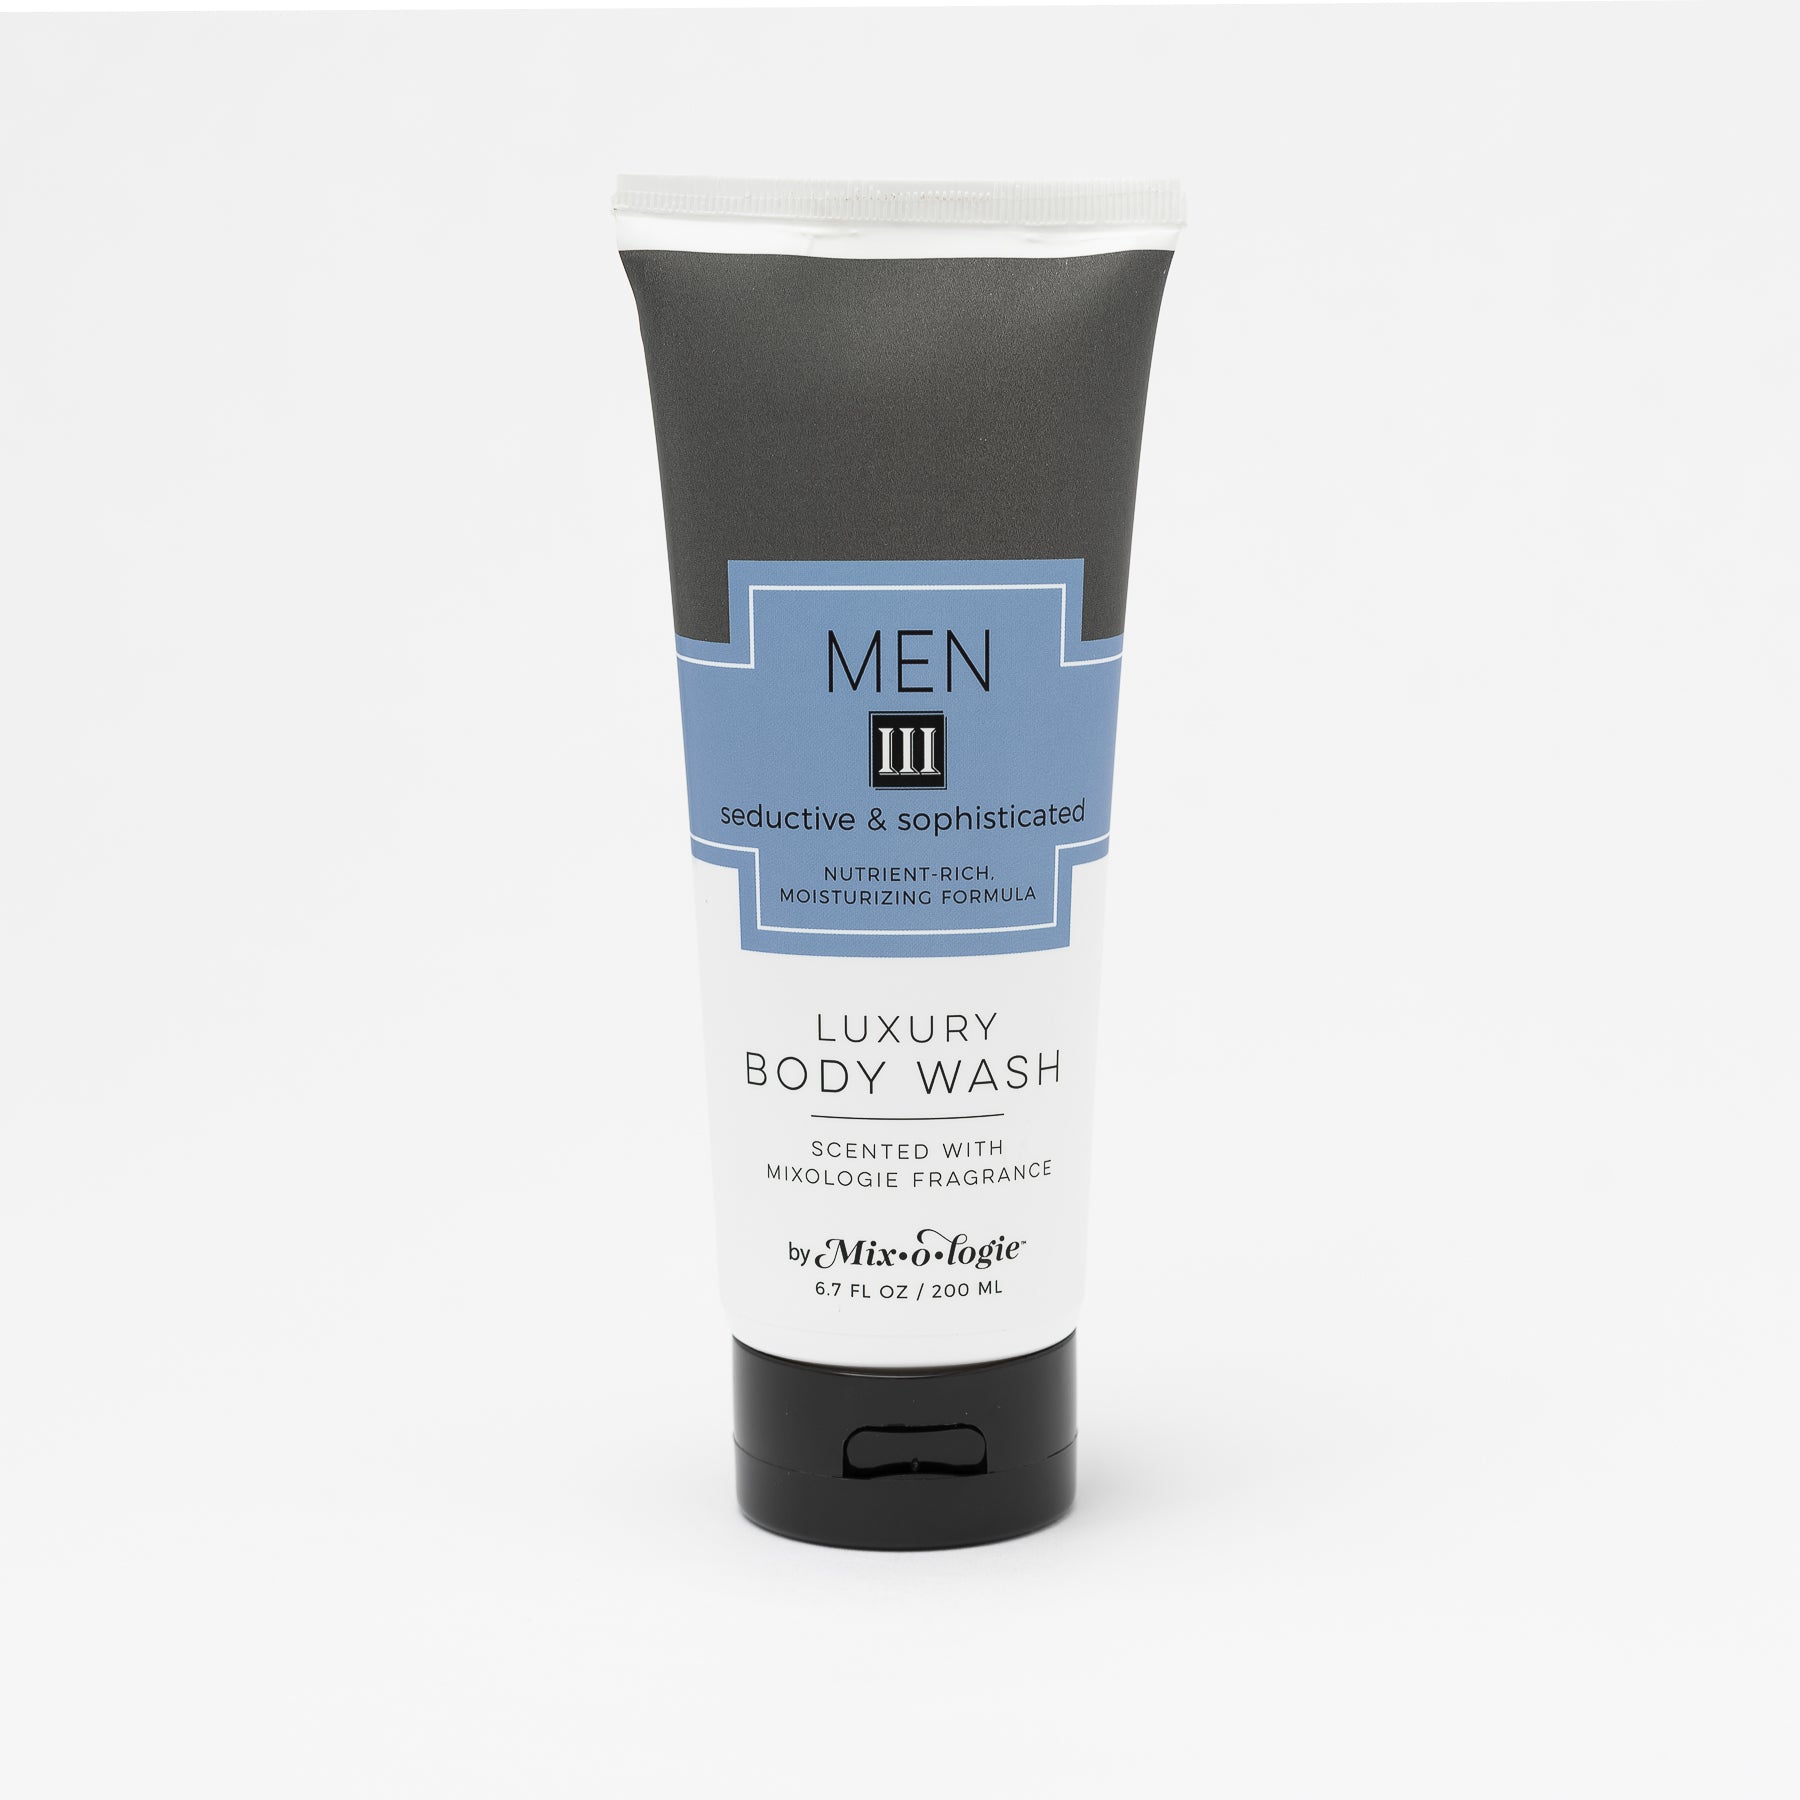 Luxury Body Wash in Men III (Seductive & Sophisticated) in grey color package with blue label in white background.